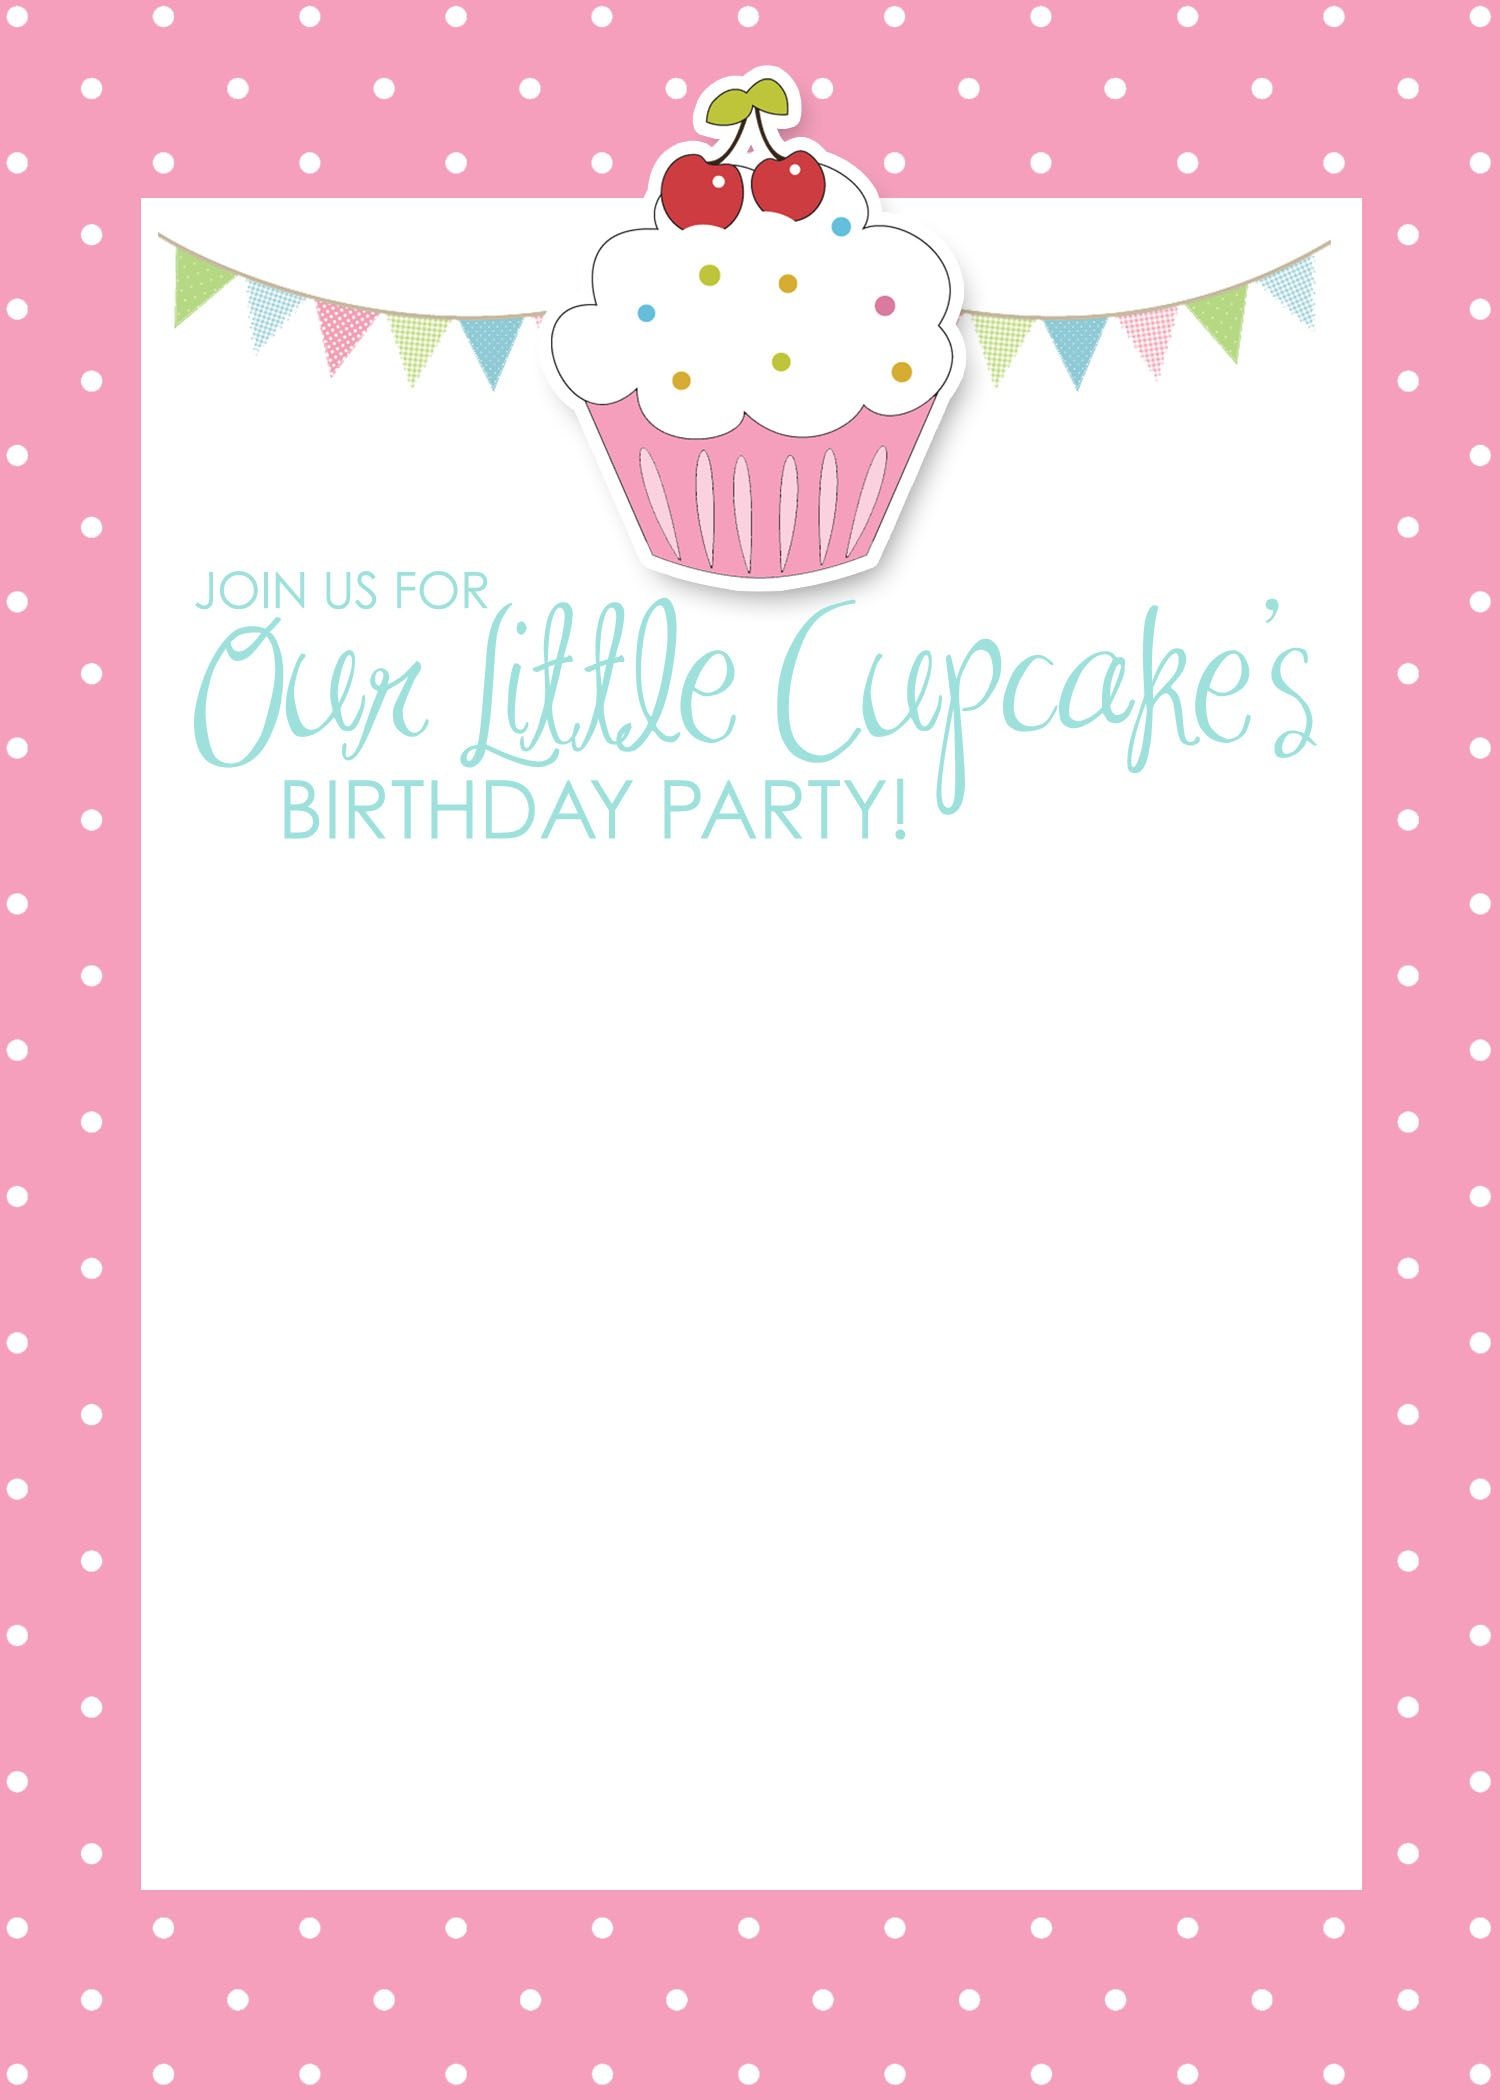 Cupcake Birthday Party With Free Printables | Detalles Fiestas - Free Printable Birthday Invitations Pinterest